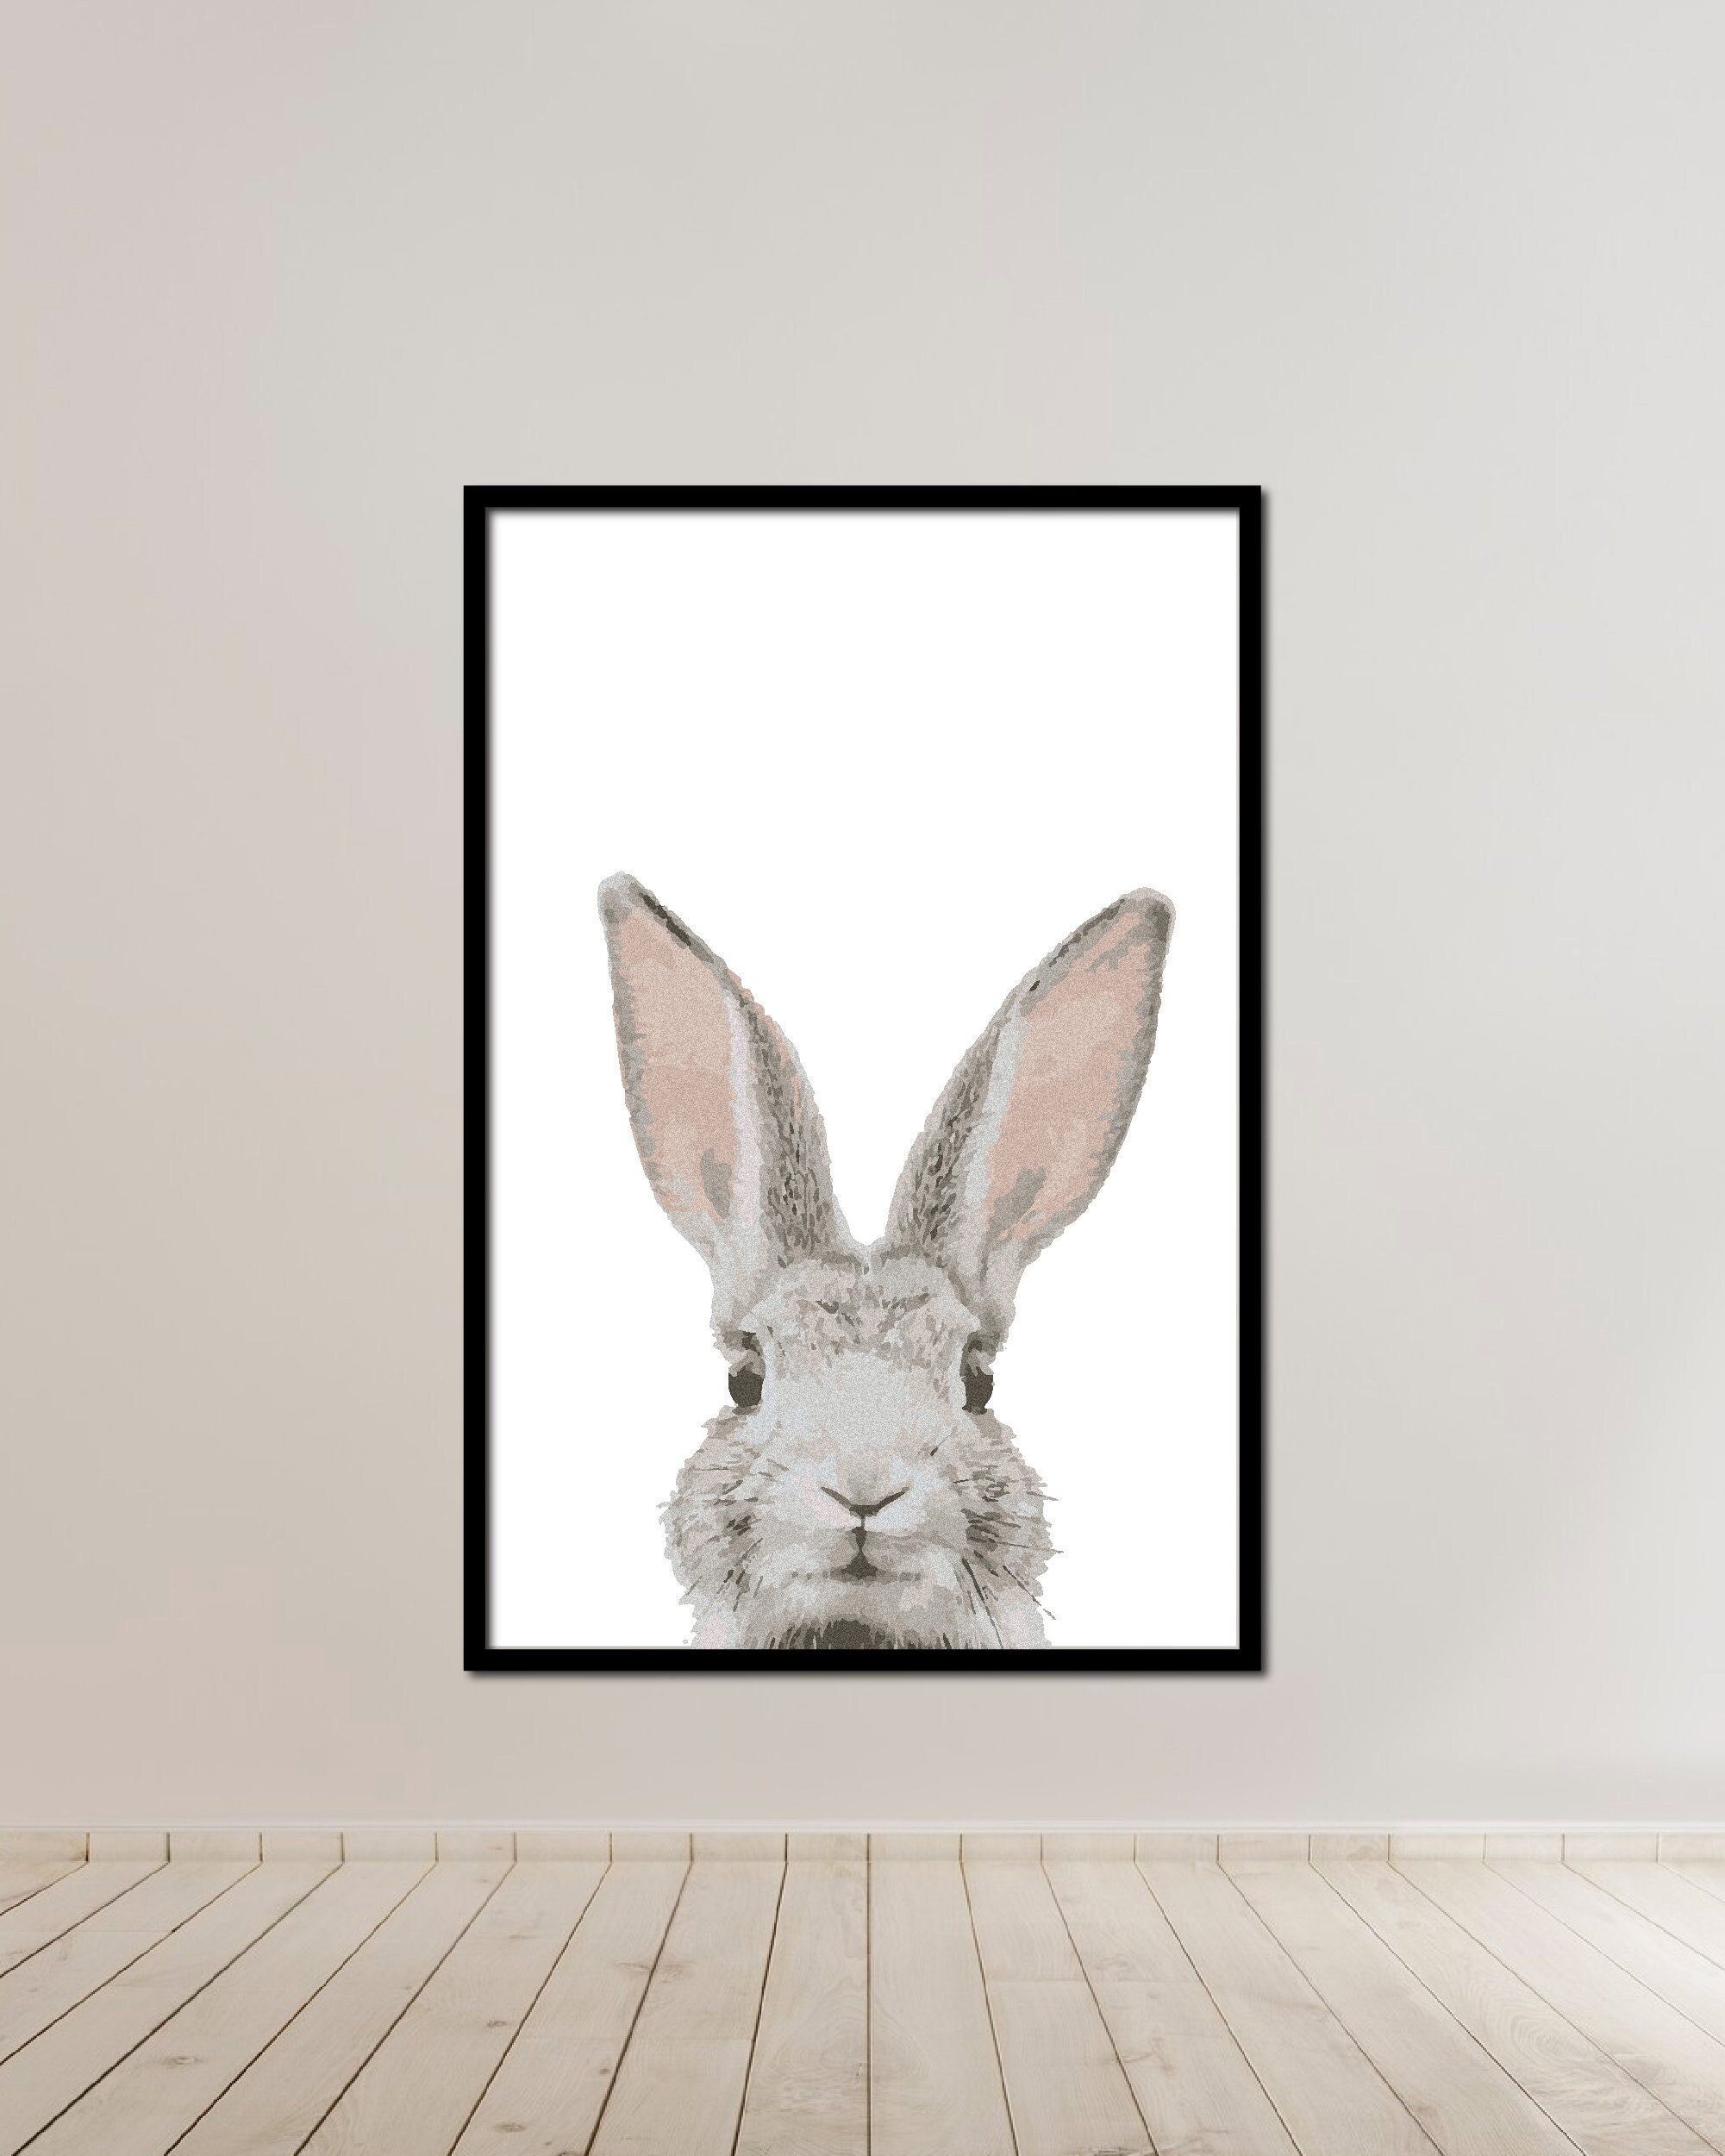 Rabbit Bunny Face Printable Wall Art Design Home Decor Instant Download  Various Sizes Contemporary Art Poster Animals Design 